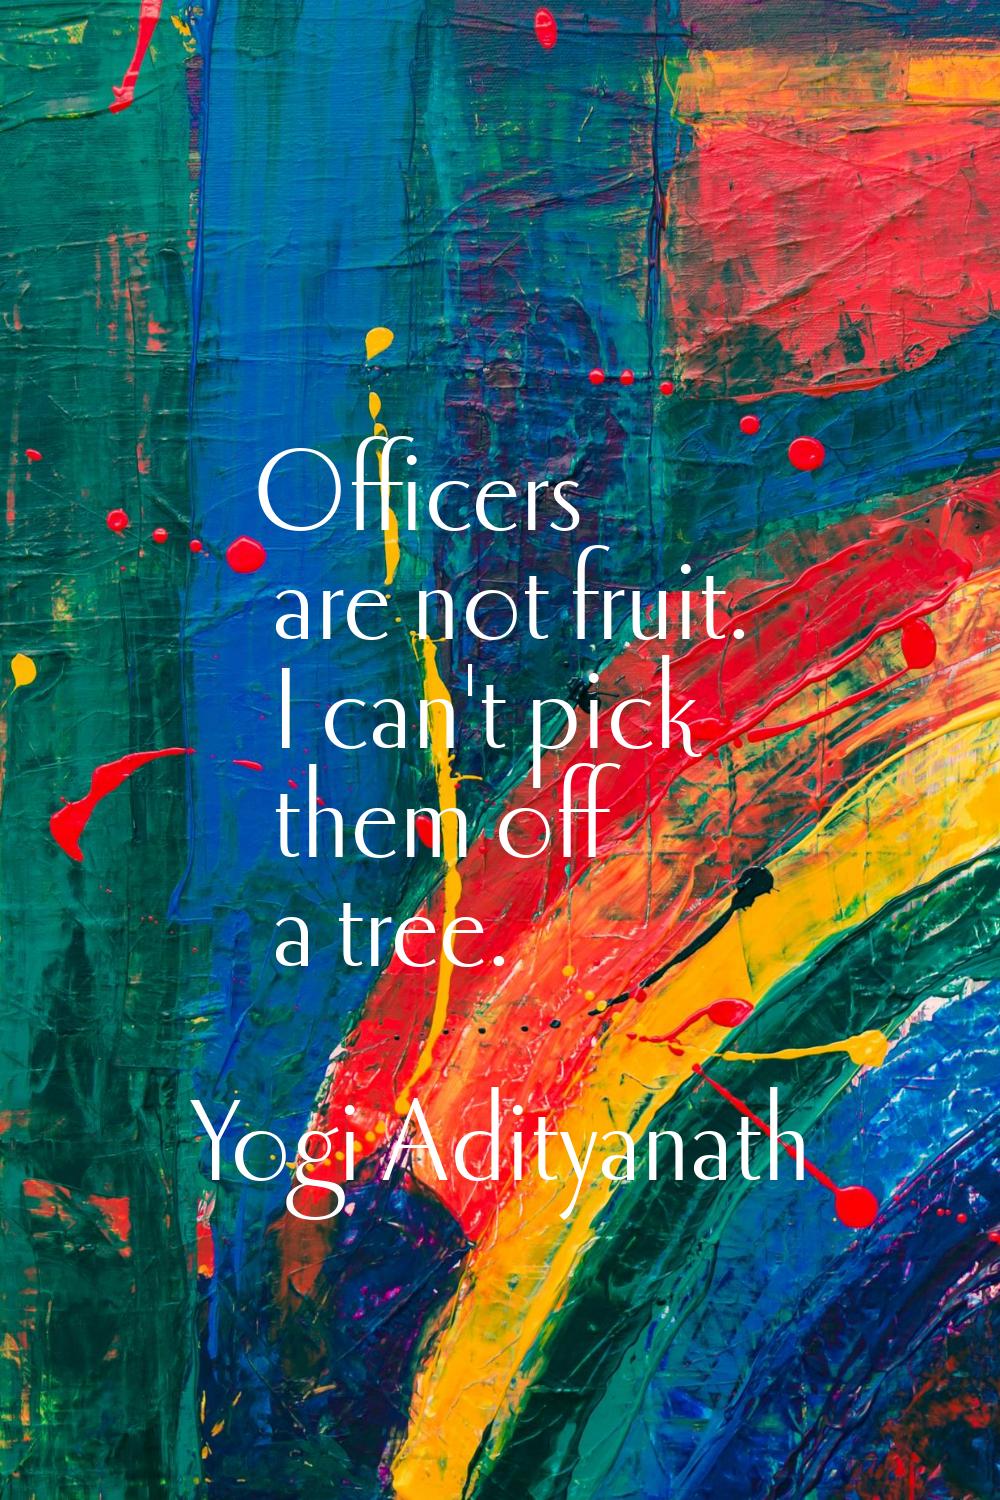 Officers are not fruit. I can't pick them off a tree.